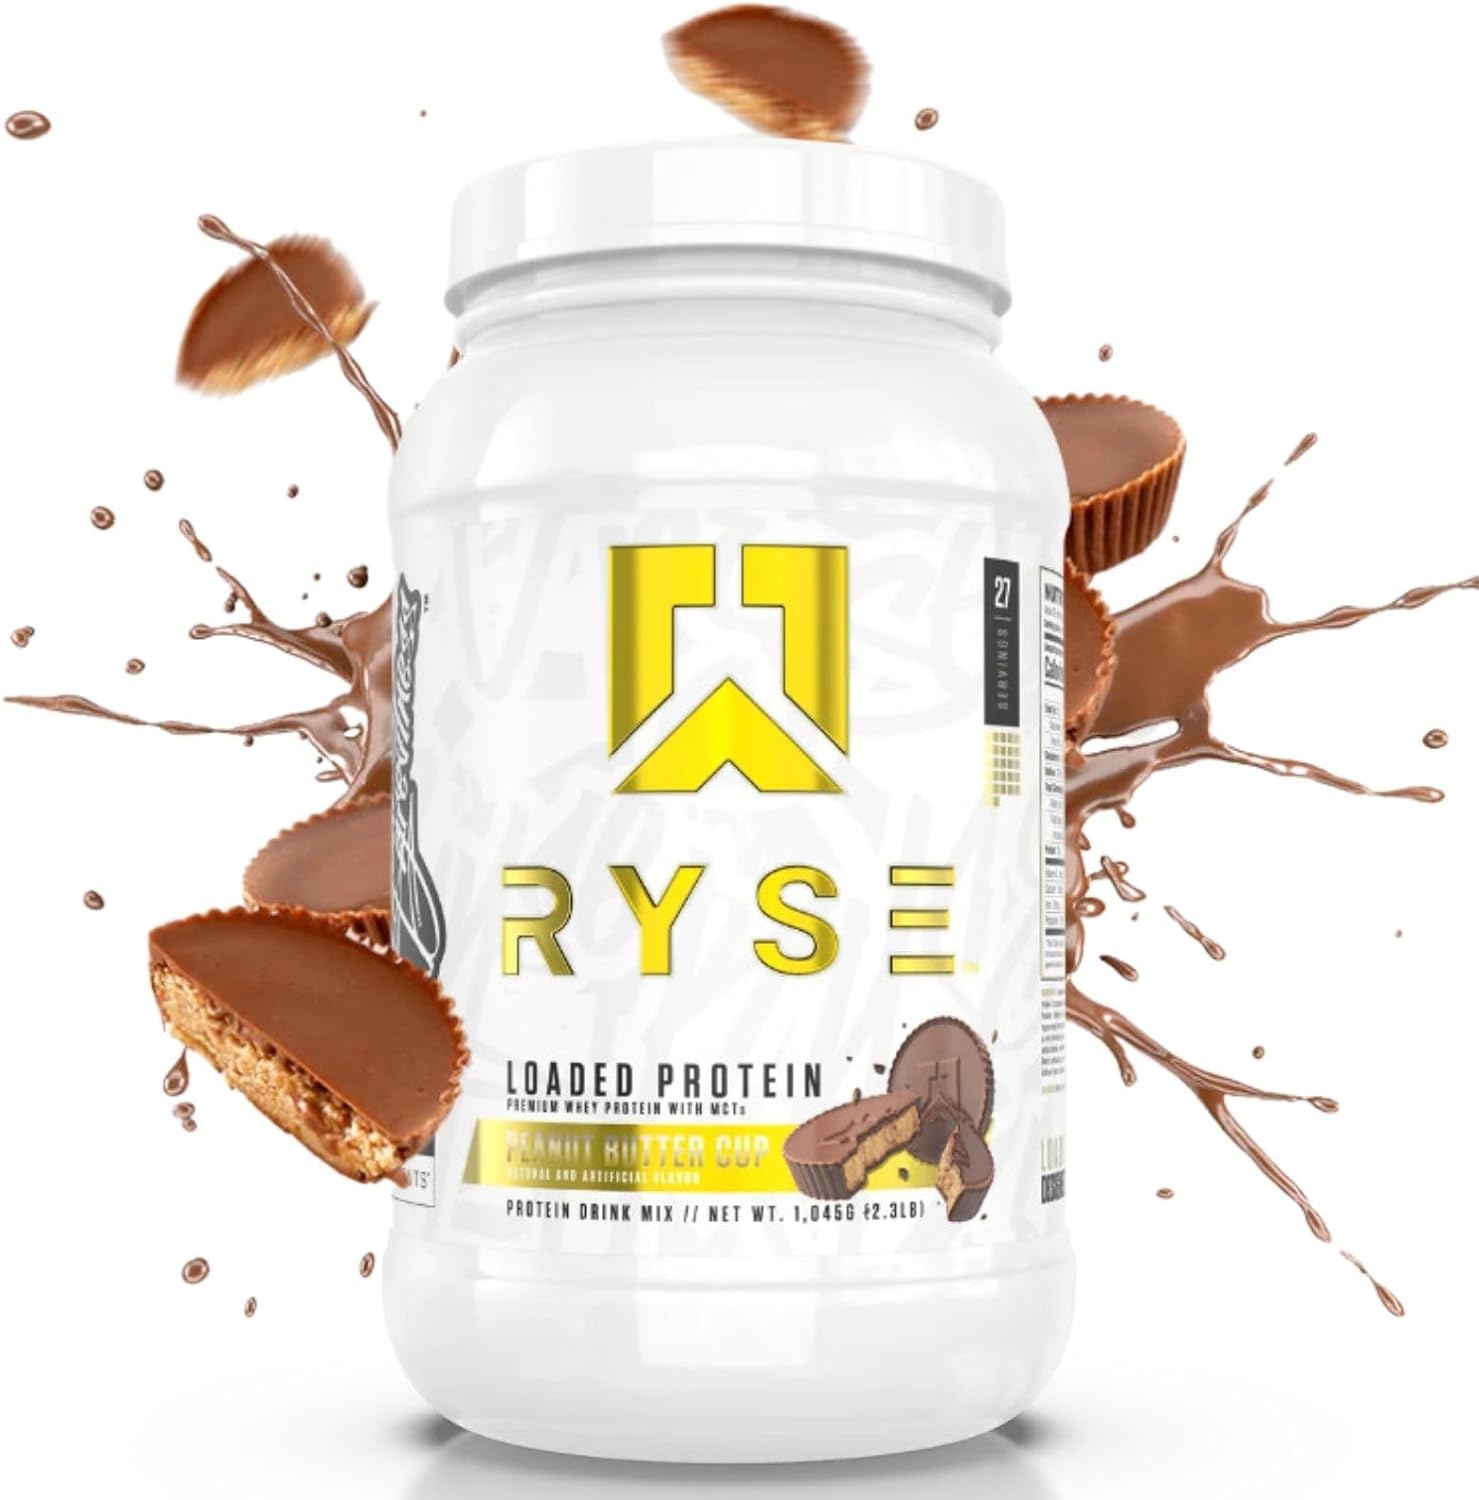 RYSE Up Supplements Loaded Protein Powder | 25g Whey Protein Isolate & Concentrate | with Prebiotic Fiber & MCTs | Low Carbs & Low Sugar | 27 Servings (Peanut Butter Cup)